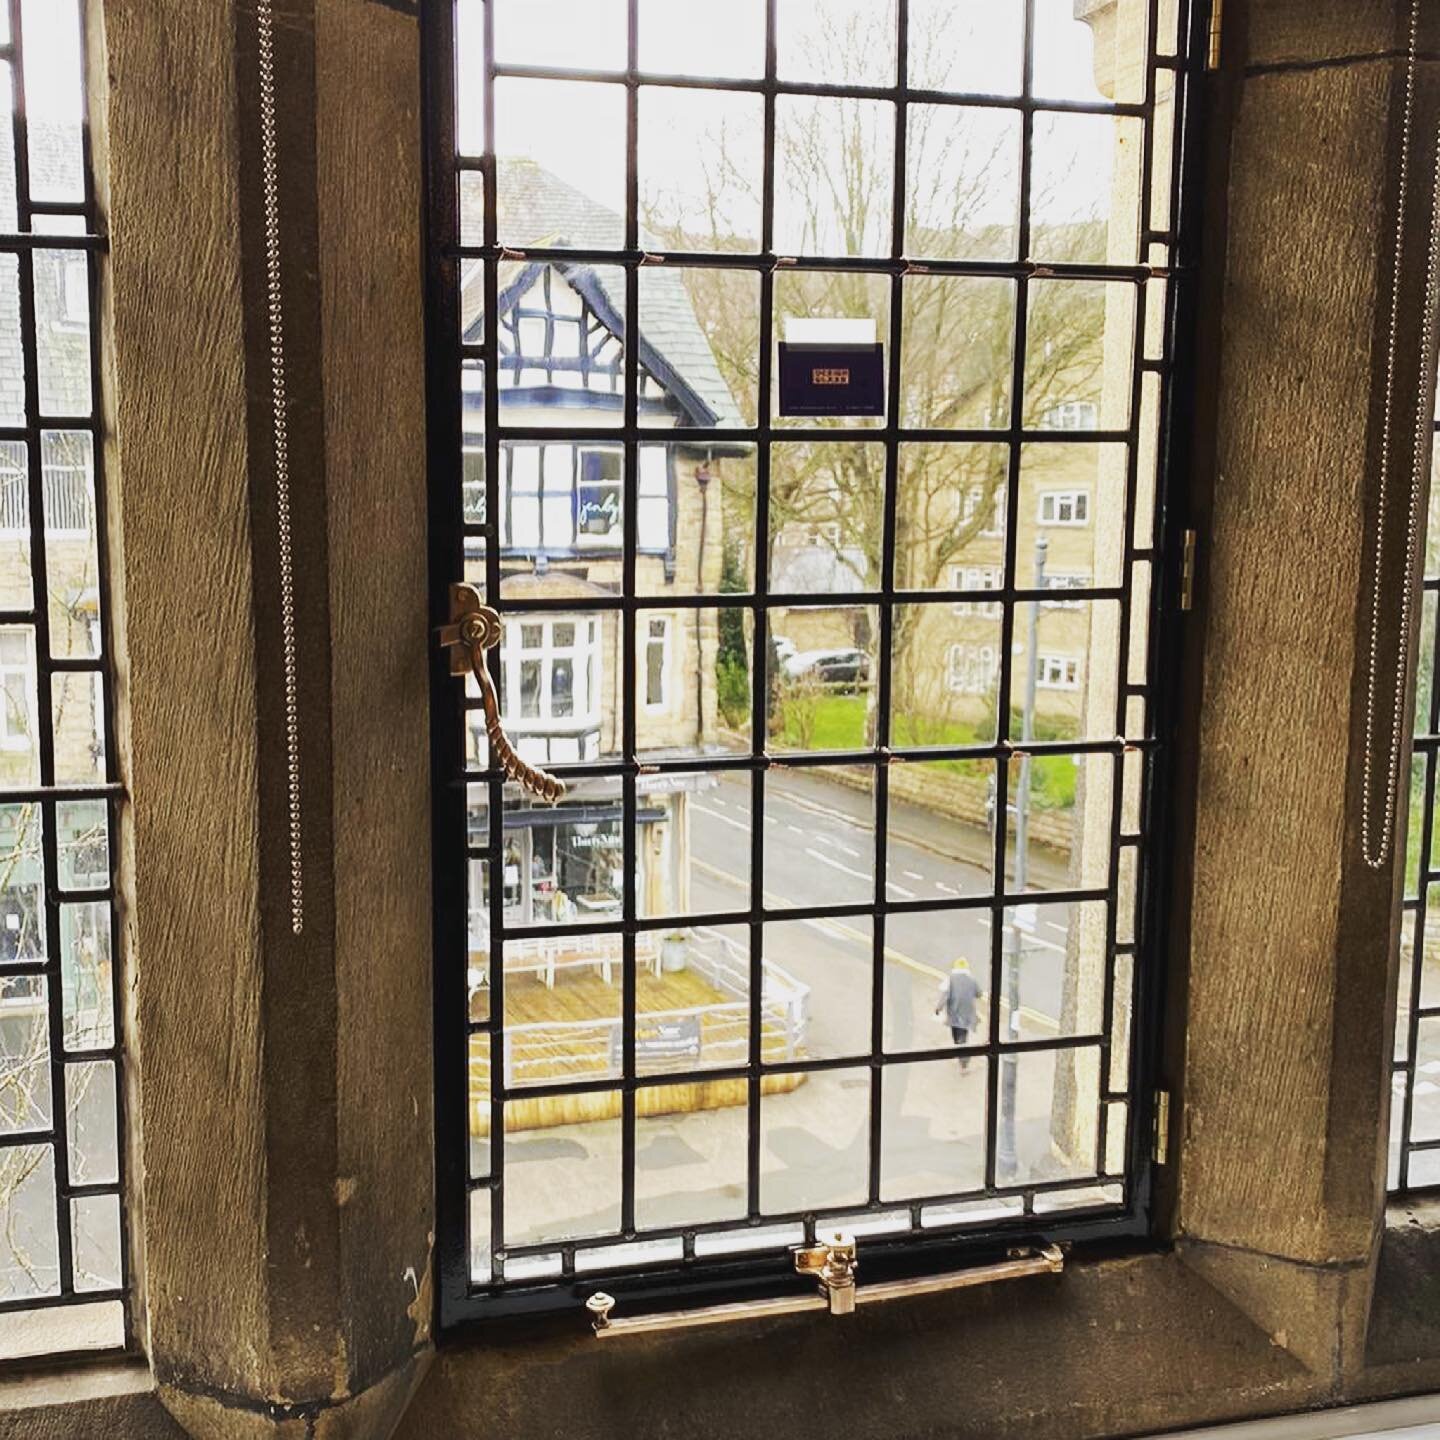 Restoration project completed. This metal casement window was refurbished using the same lead and glass. Great work by Andy and Alex 👍🏼 #metal #window #leadedlights #metalwork #glazing #refurbishment #repair #goodasnew #windows #heritage #listedbui